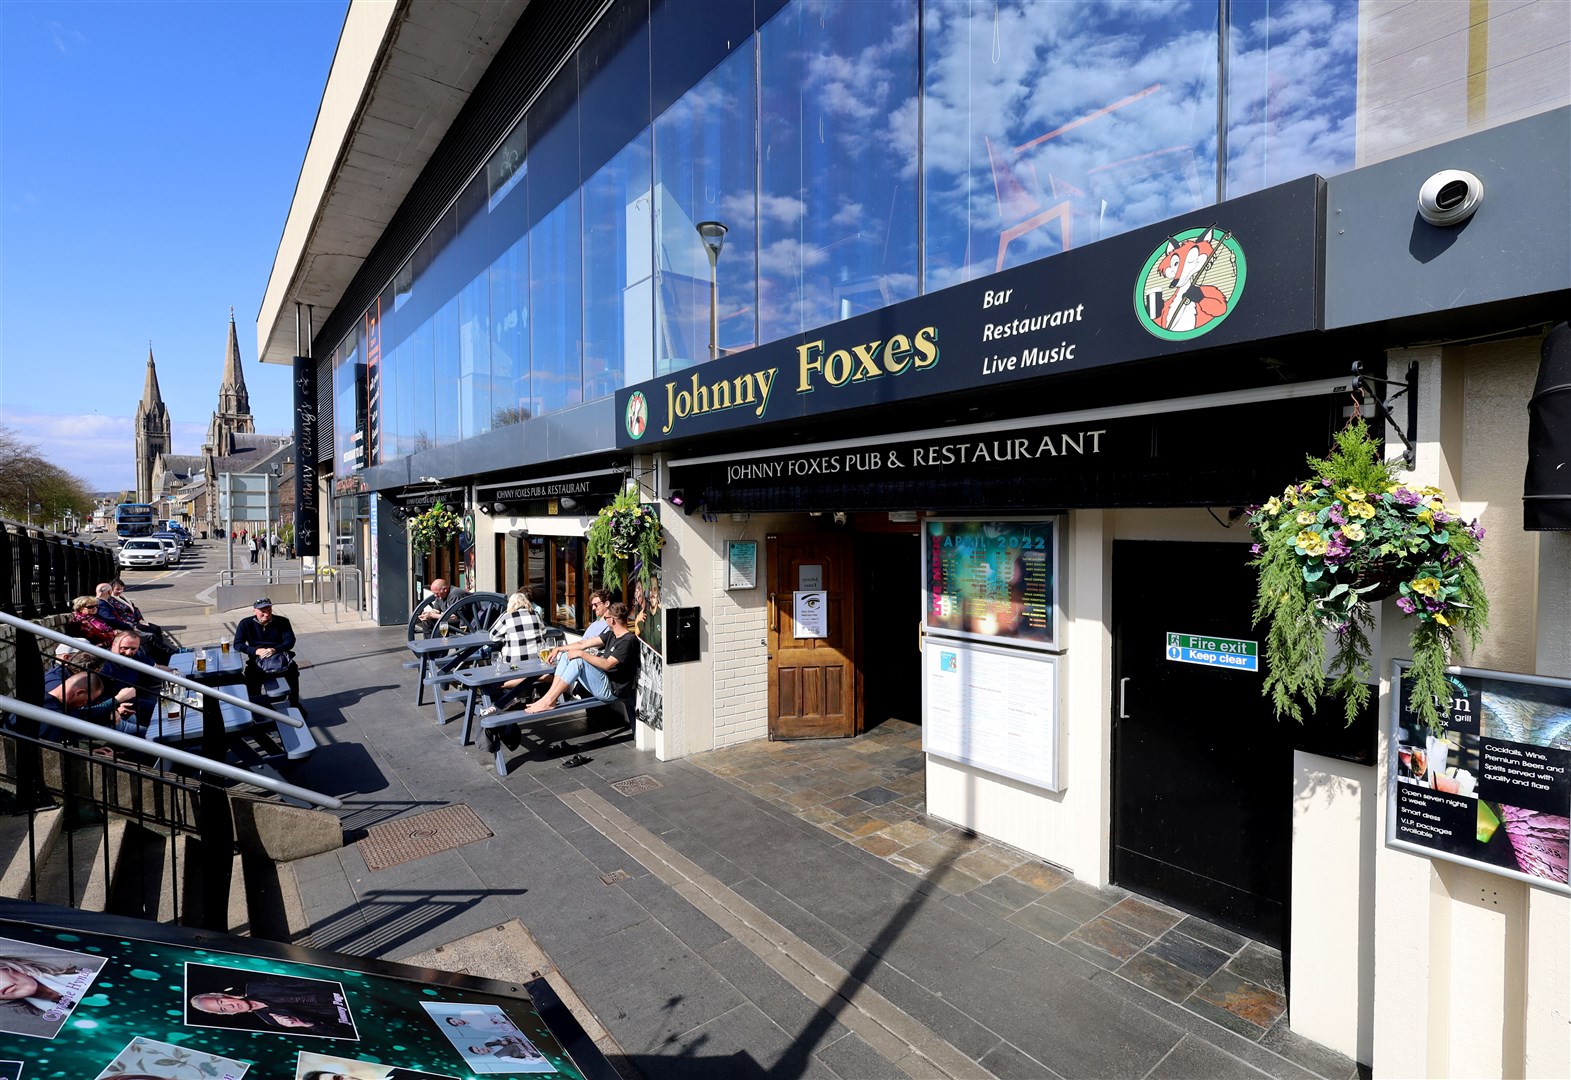 The Secret Drinker reviews Johnny Foxes in Highland capital